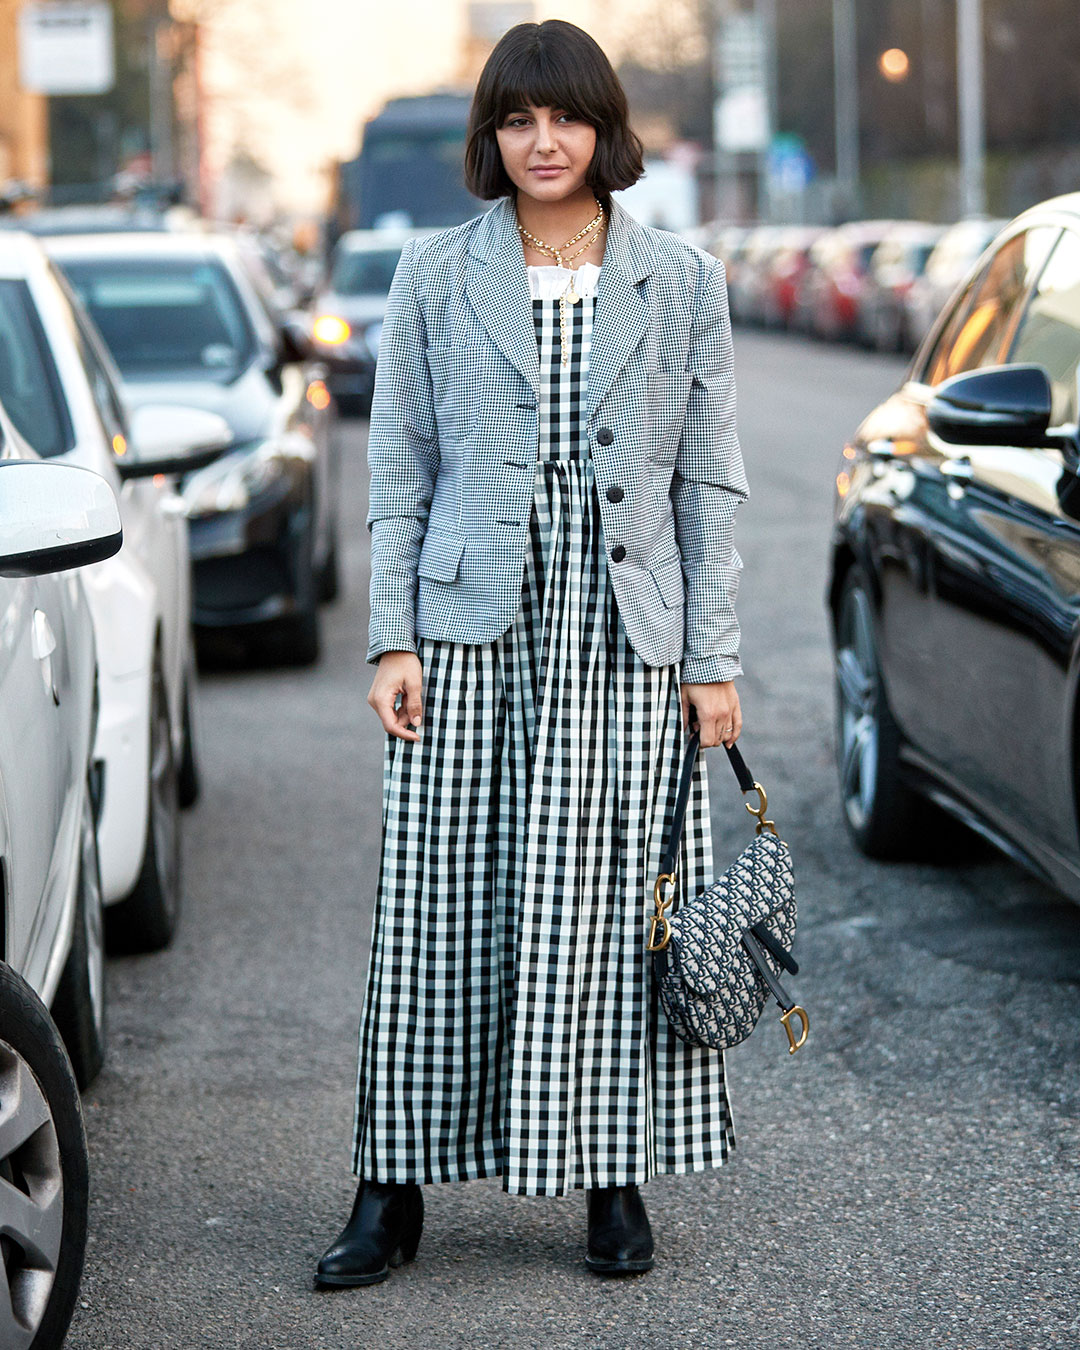 Best Street Style Dresses: Maria Bernad in Gingham Dress and Dior Saddle Bag